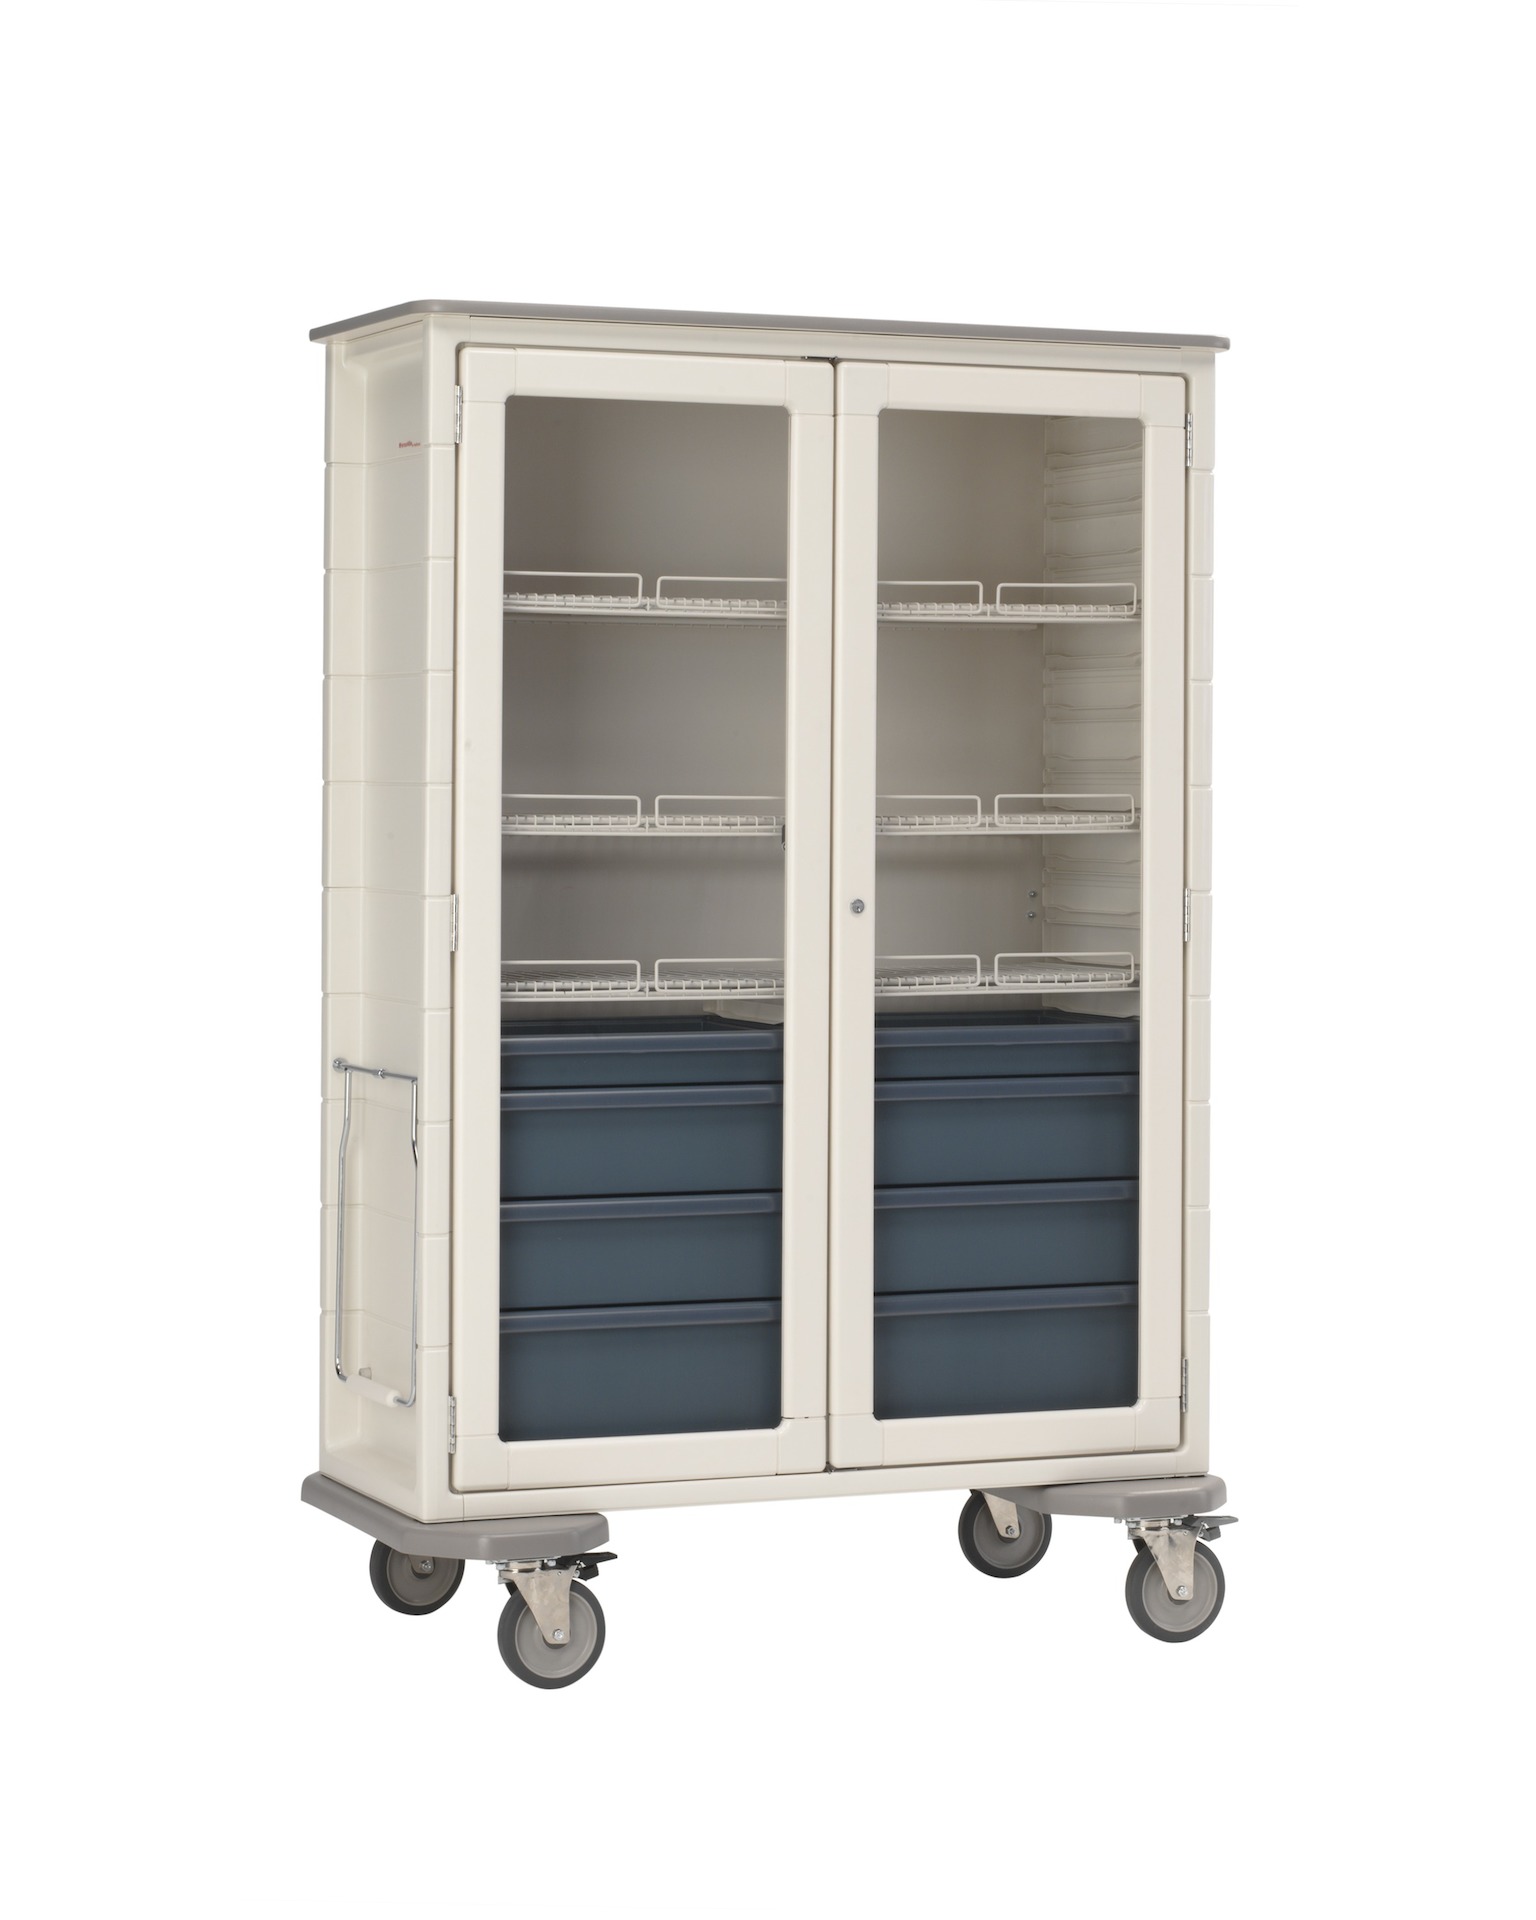 A tall Procedure Supply Cart cabinet with closed doors. Inside storage is visible through clear doors. Front view.